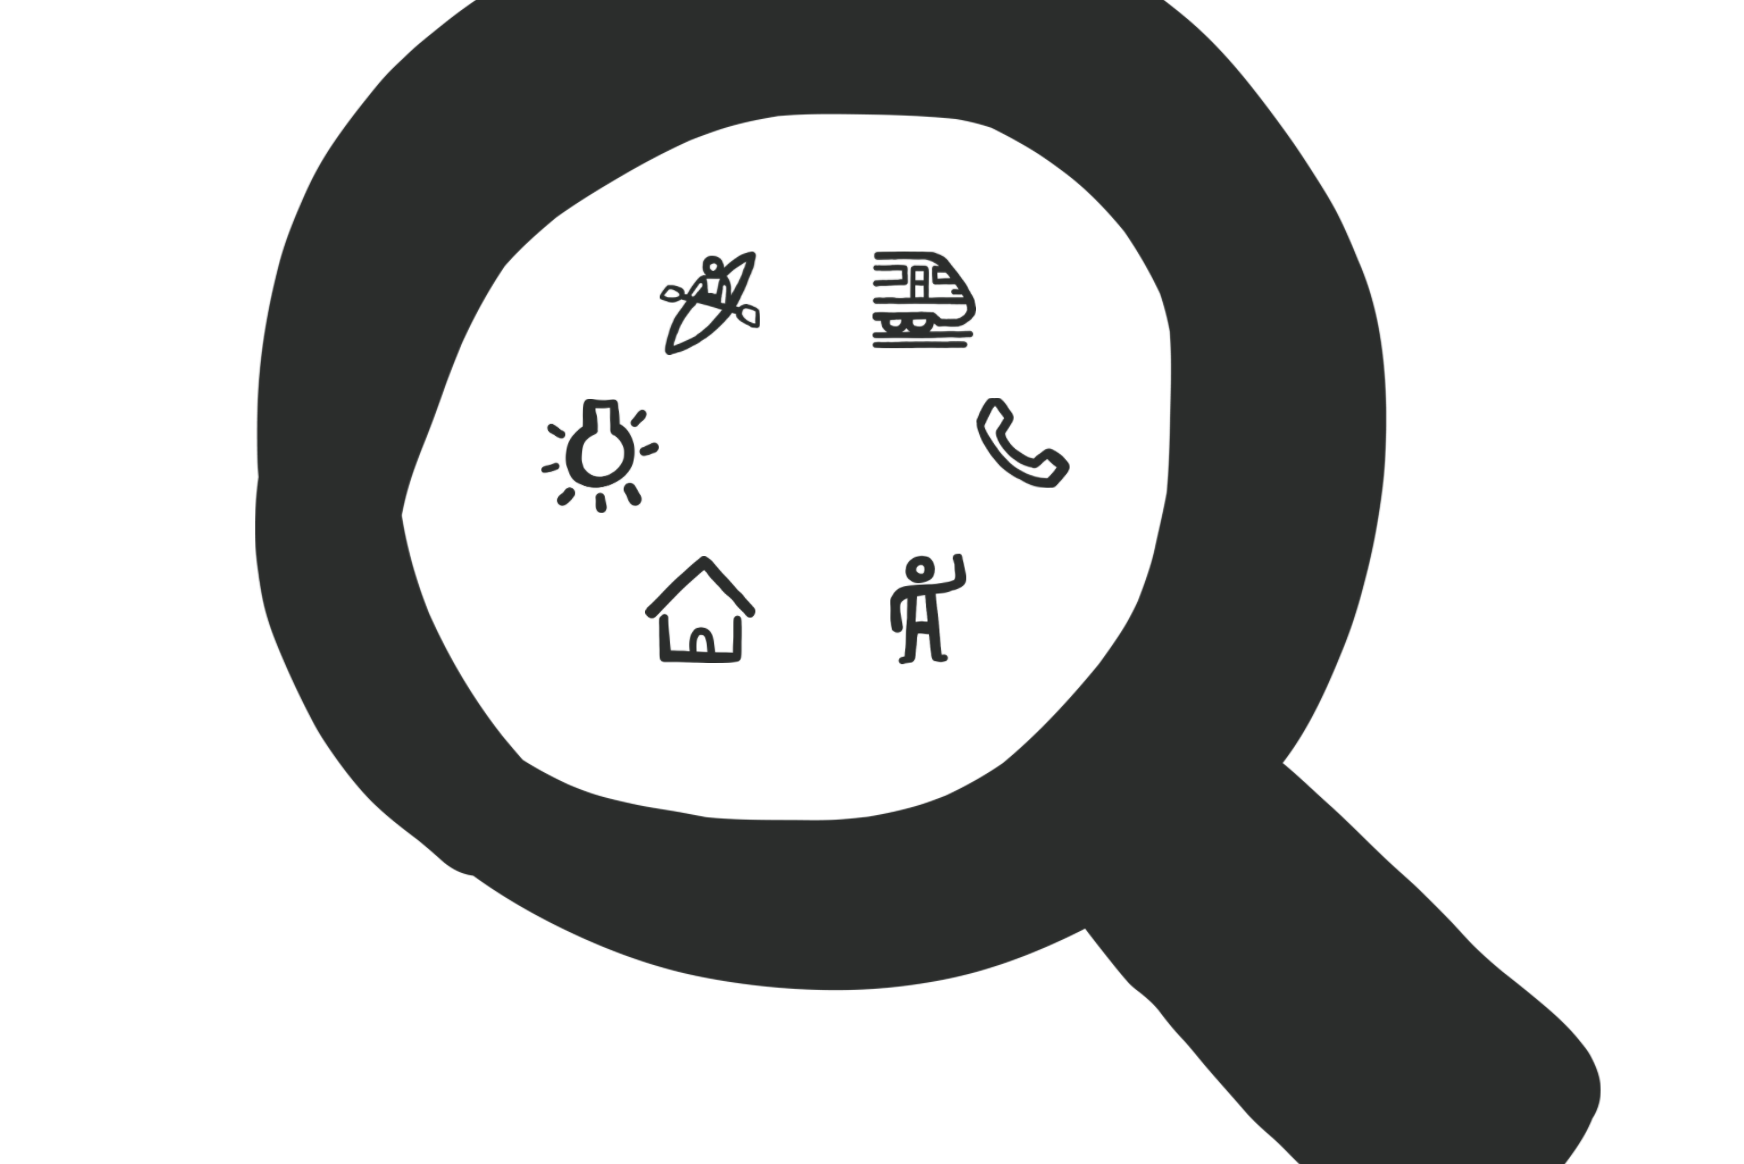 A magnifying glass icon with a house, person, train and lightbulb - used to illustrate a carbon measurement